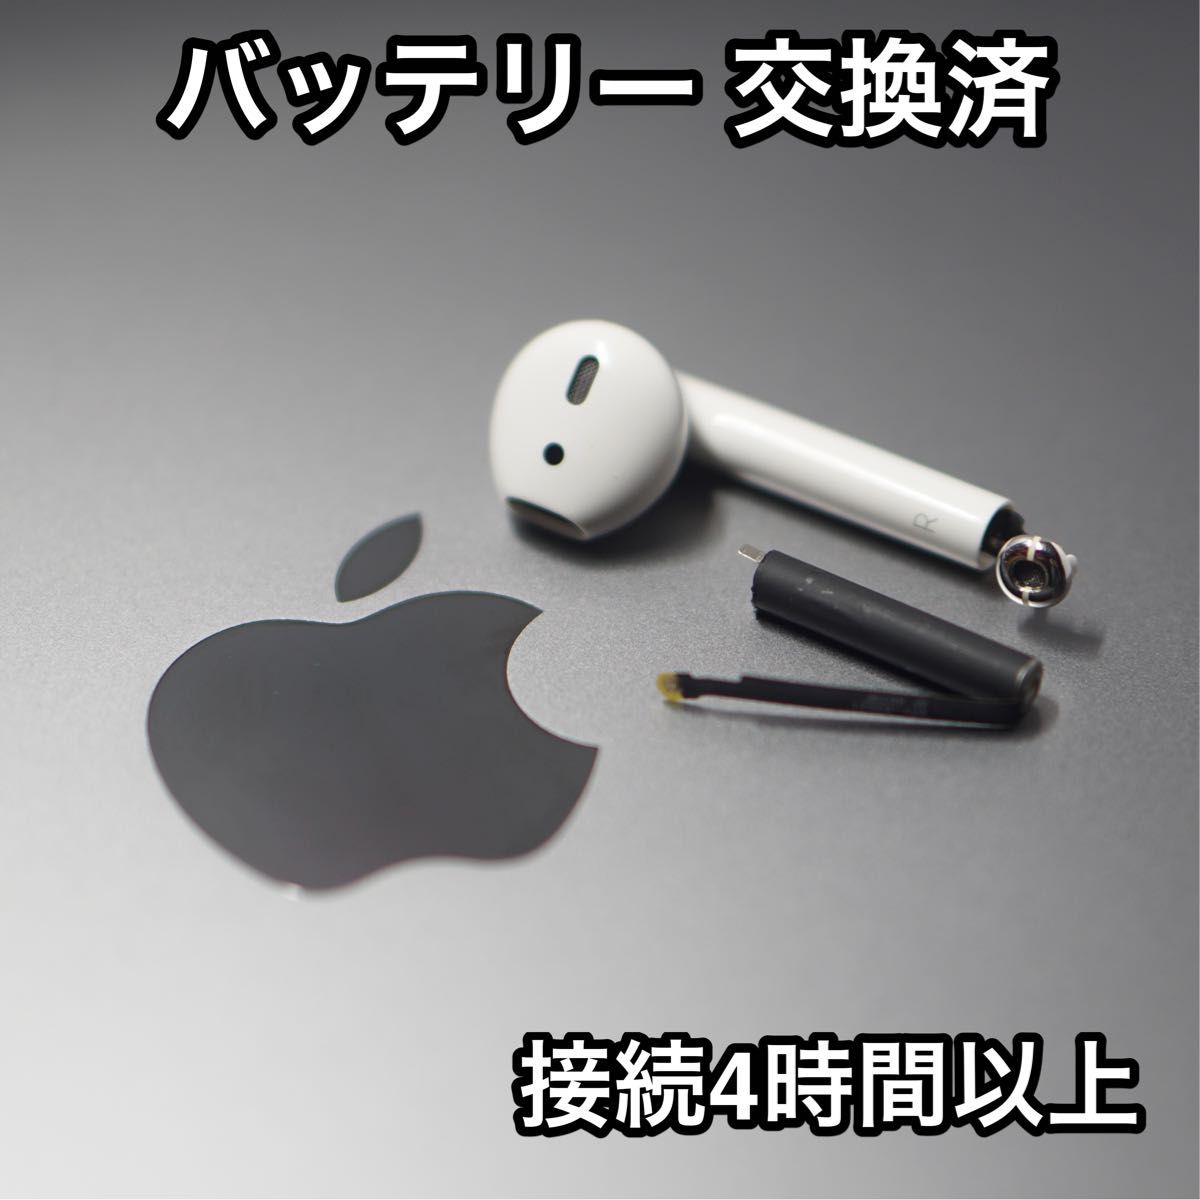 AirPods 左耳第一世代 バッテリー新品/ エアーポッズ バッテリー交換済